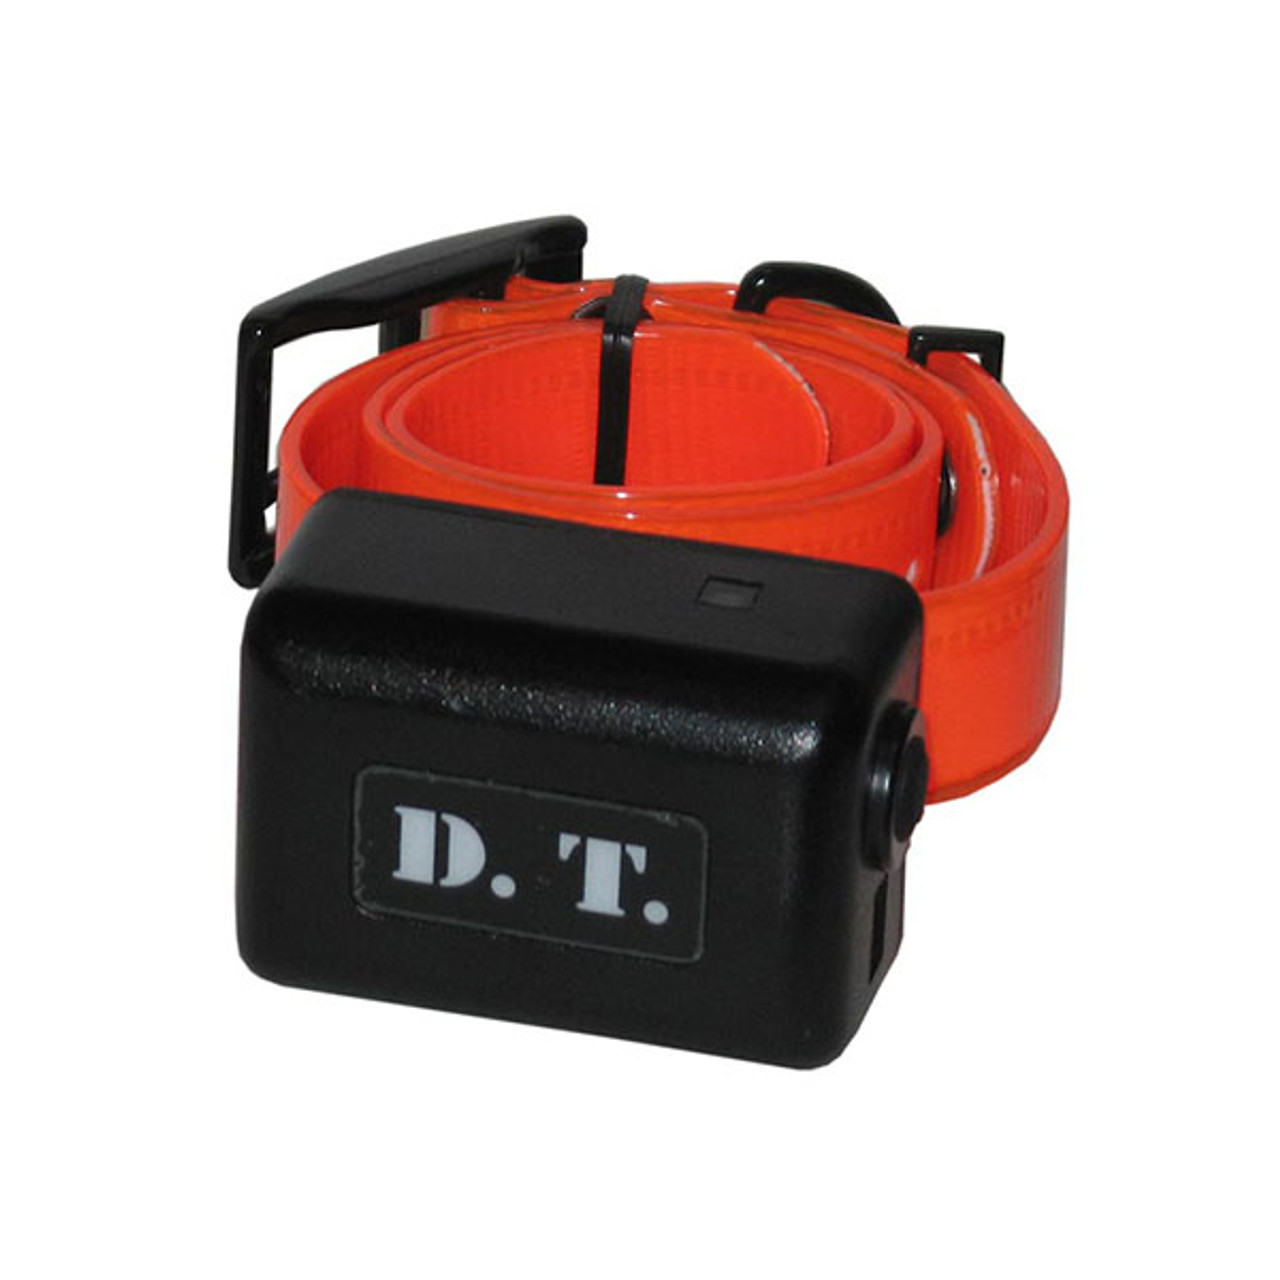 This Add-On collar is compatible with any H2O PLUS system, and it can also replace any lost or damaged H2O 1800 series collar unit.